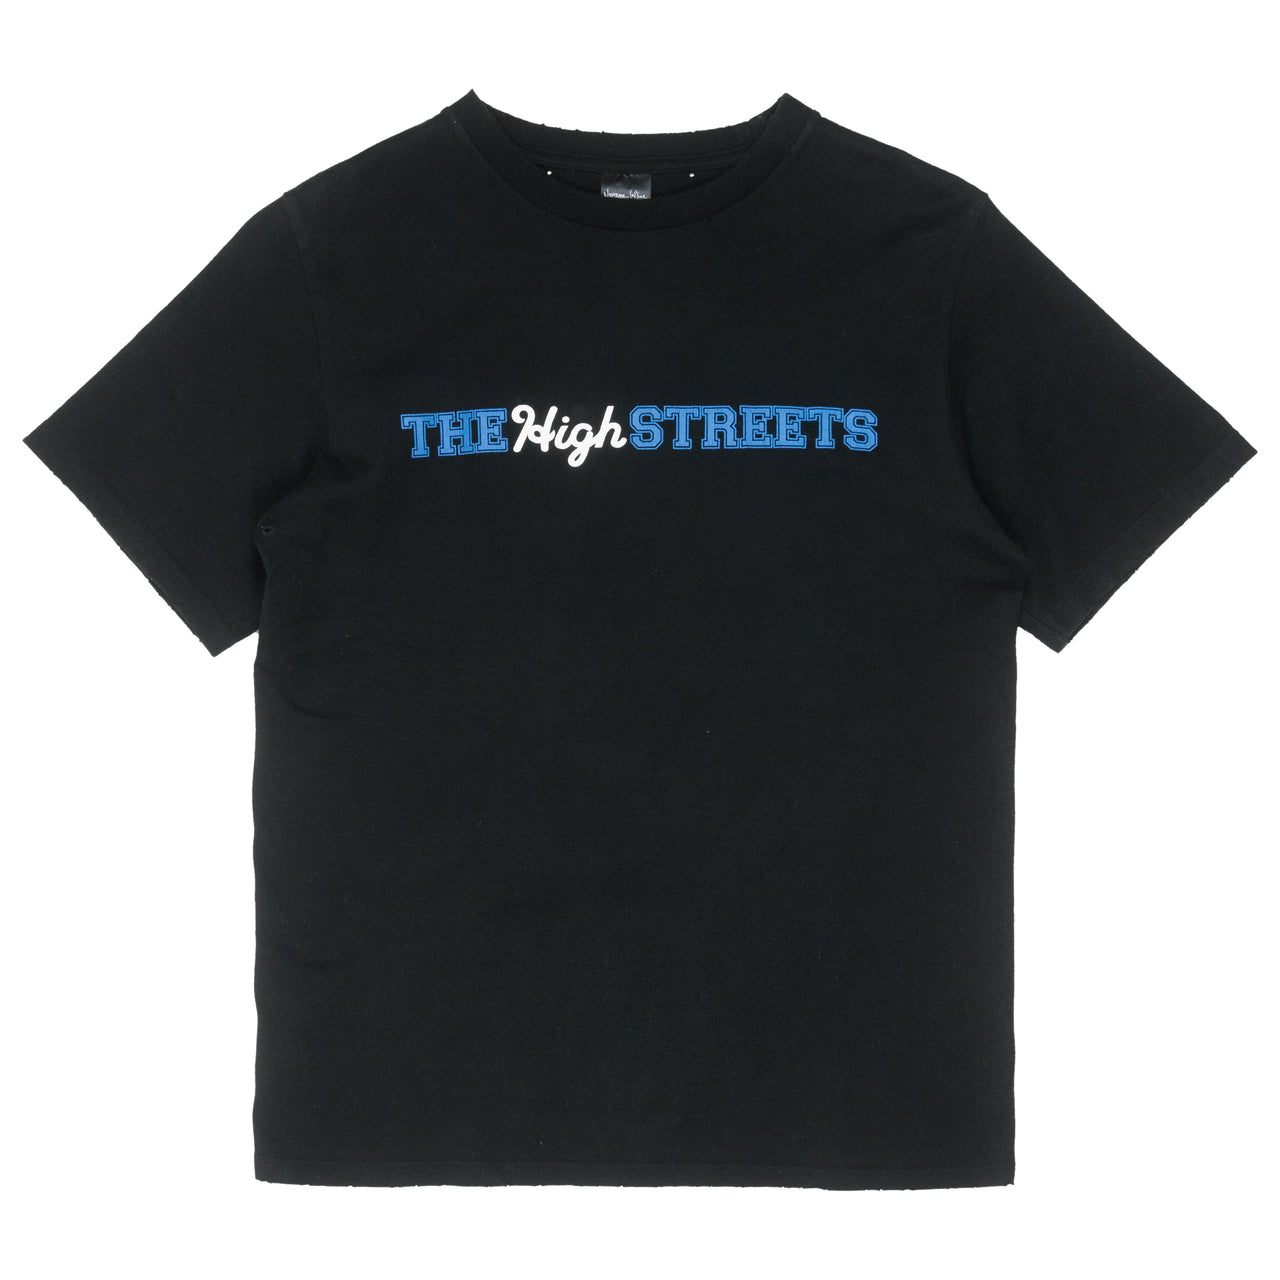 Number (N)ine The High Streets Tee - AW05 "The High Streets"